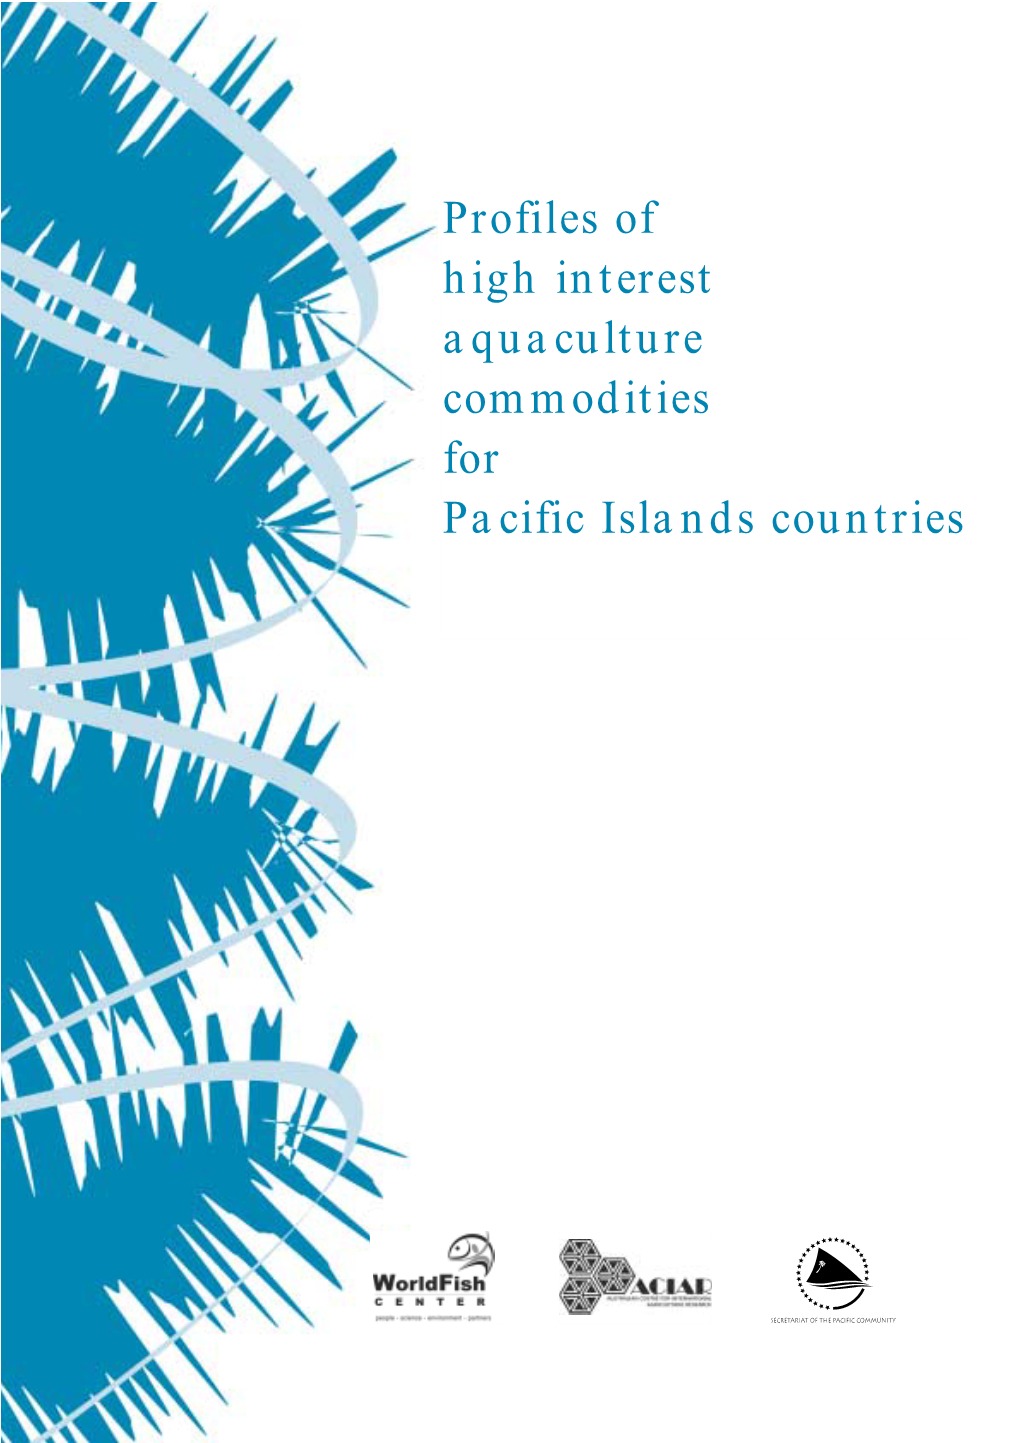 Profiles of High Interest Aquaculture Commodities for Pacific